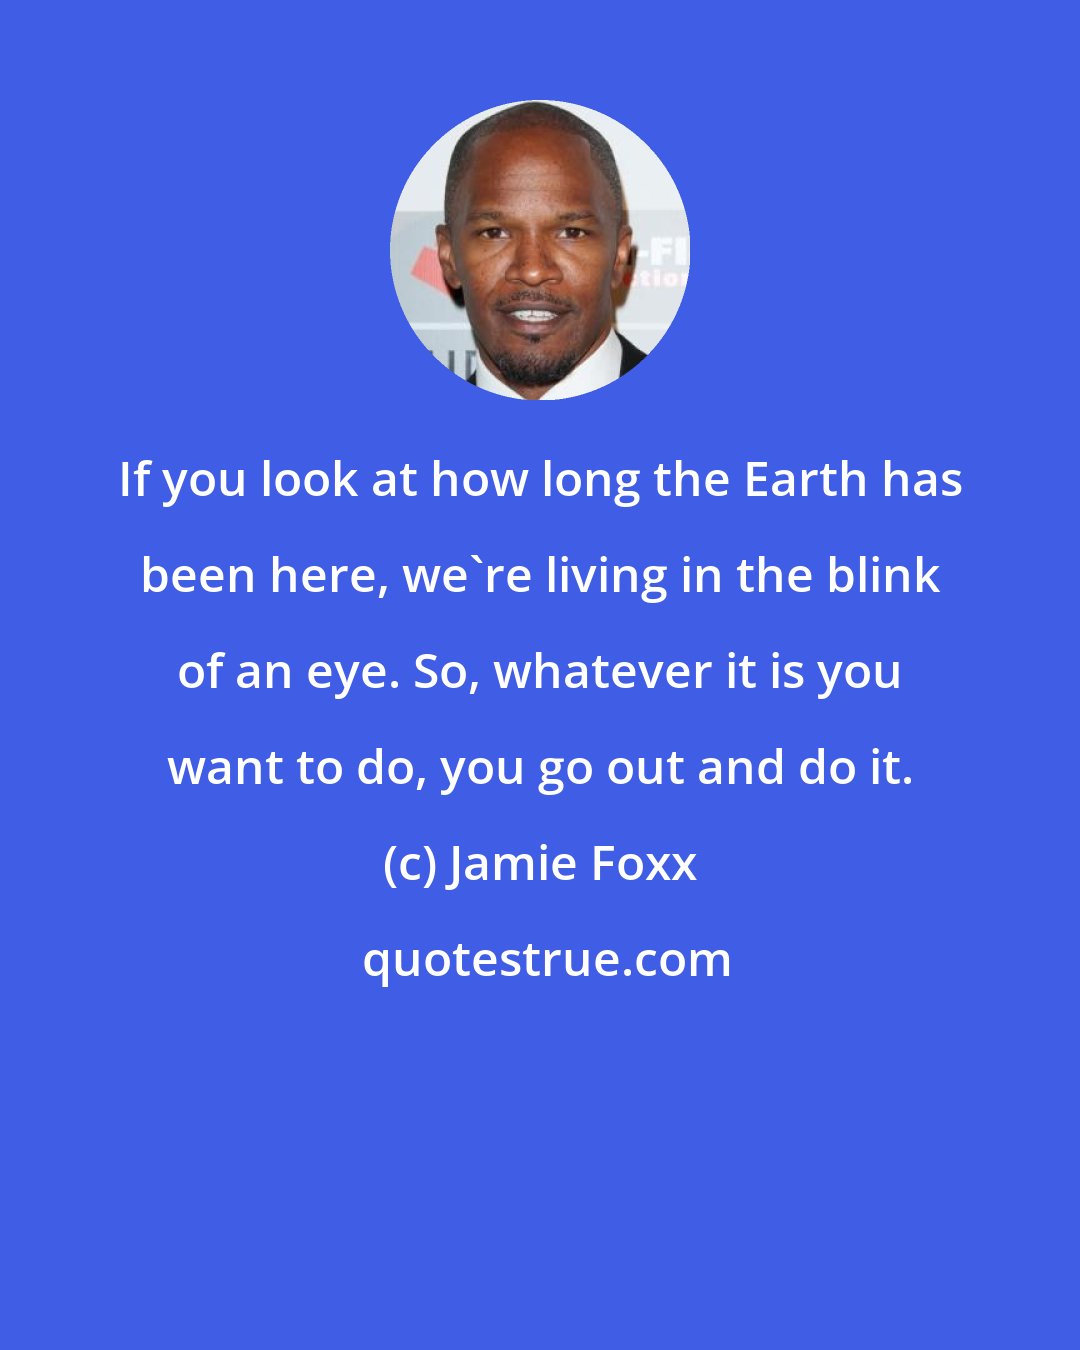 Jamie Foxx: If you look at how long the Earth has been here, we're living in the blink of an eye. So, whatever it is you want to do, you go out and do it.